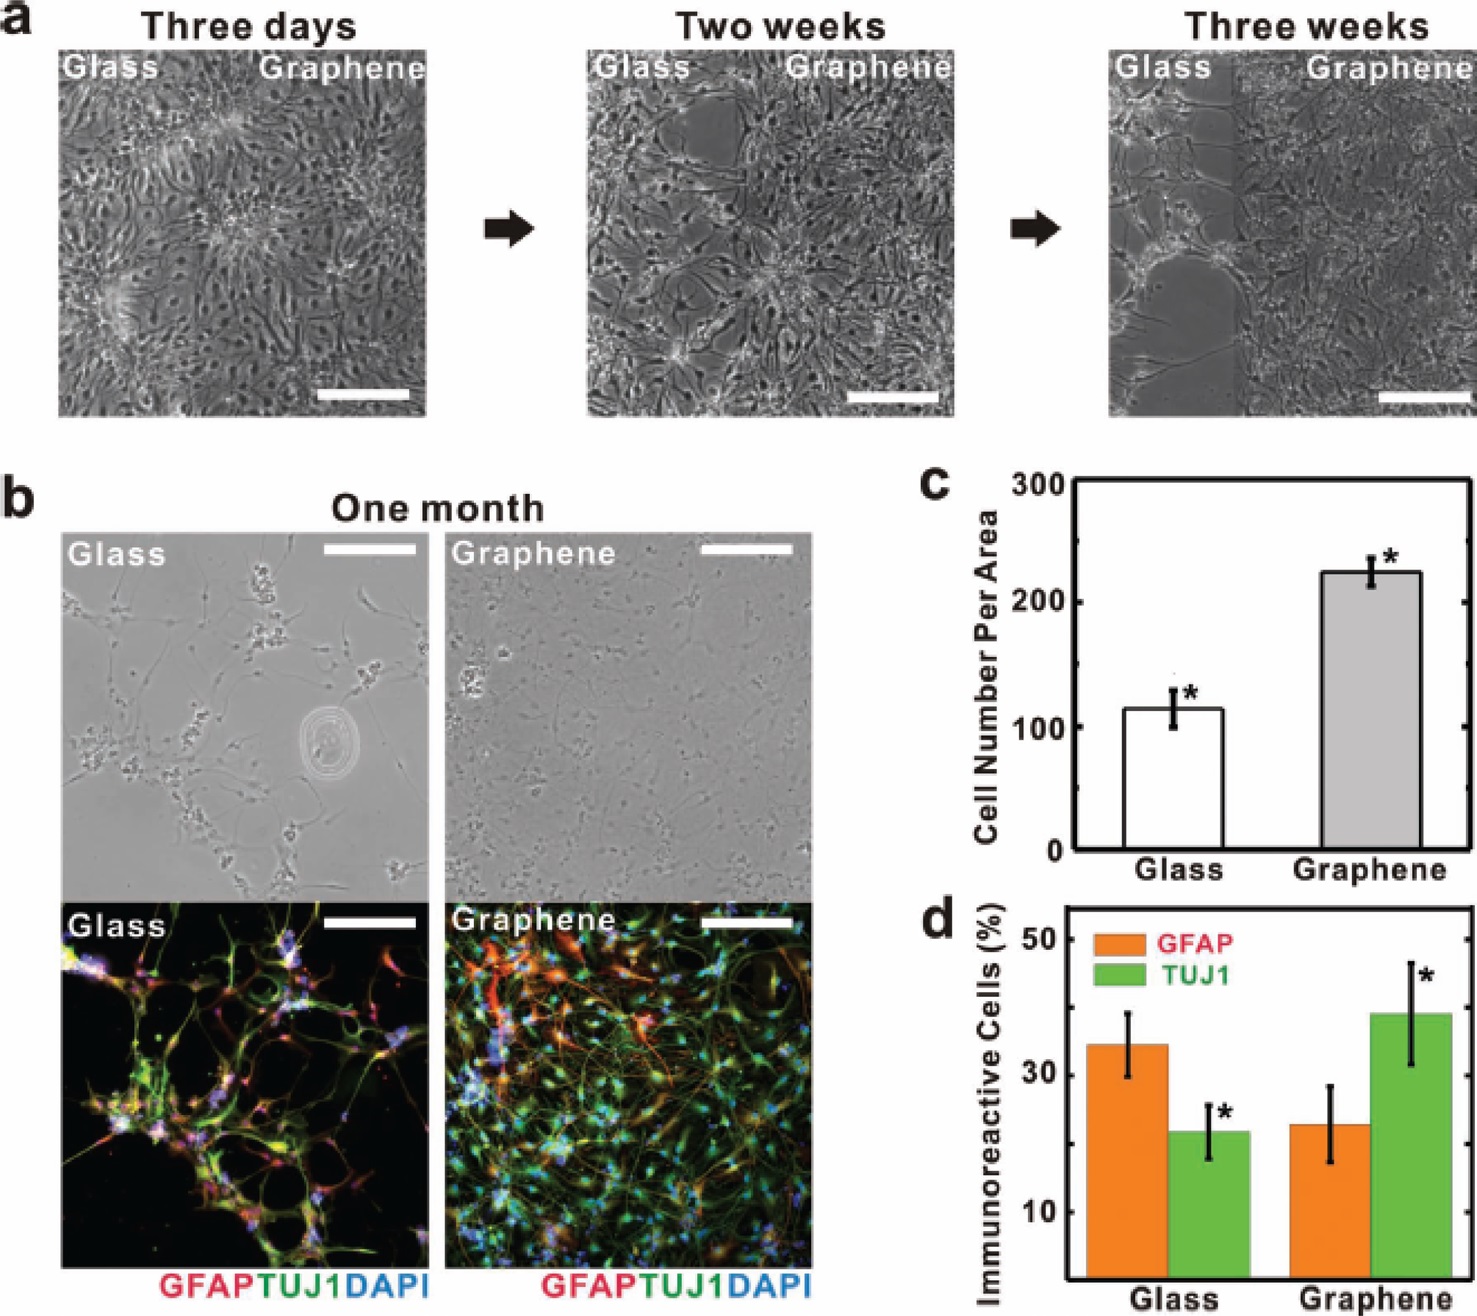 Enhanced neural-differentiation of human neural stem cells (hNSCs) on graphene films？all scale bars represent 200 μm. (a) Bright-field images of the hNSCs differentiated for three days (left), two weeks (middle), and three weeks (right), (b) bright-field (top row) and fluorescence (bottom row) images of hNSCs differentiated on glass (left) and graphene (right) after one month of differentiation？the differentiated hNSCs were immunostained with GFAP (red) for astroglial cells, TUJ1 (green) for neural cells, and DAPI (blue) for nuclei. c) Cell counts per area (0.64 mm2) on graphene and glass regions after onemonth differentiation, d) percentage of immunoreactive cells for GFAP (red) and TUJ1 (green) on glass and grapheme [24].